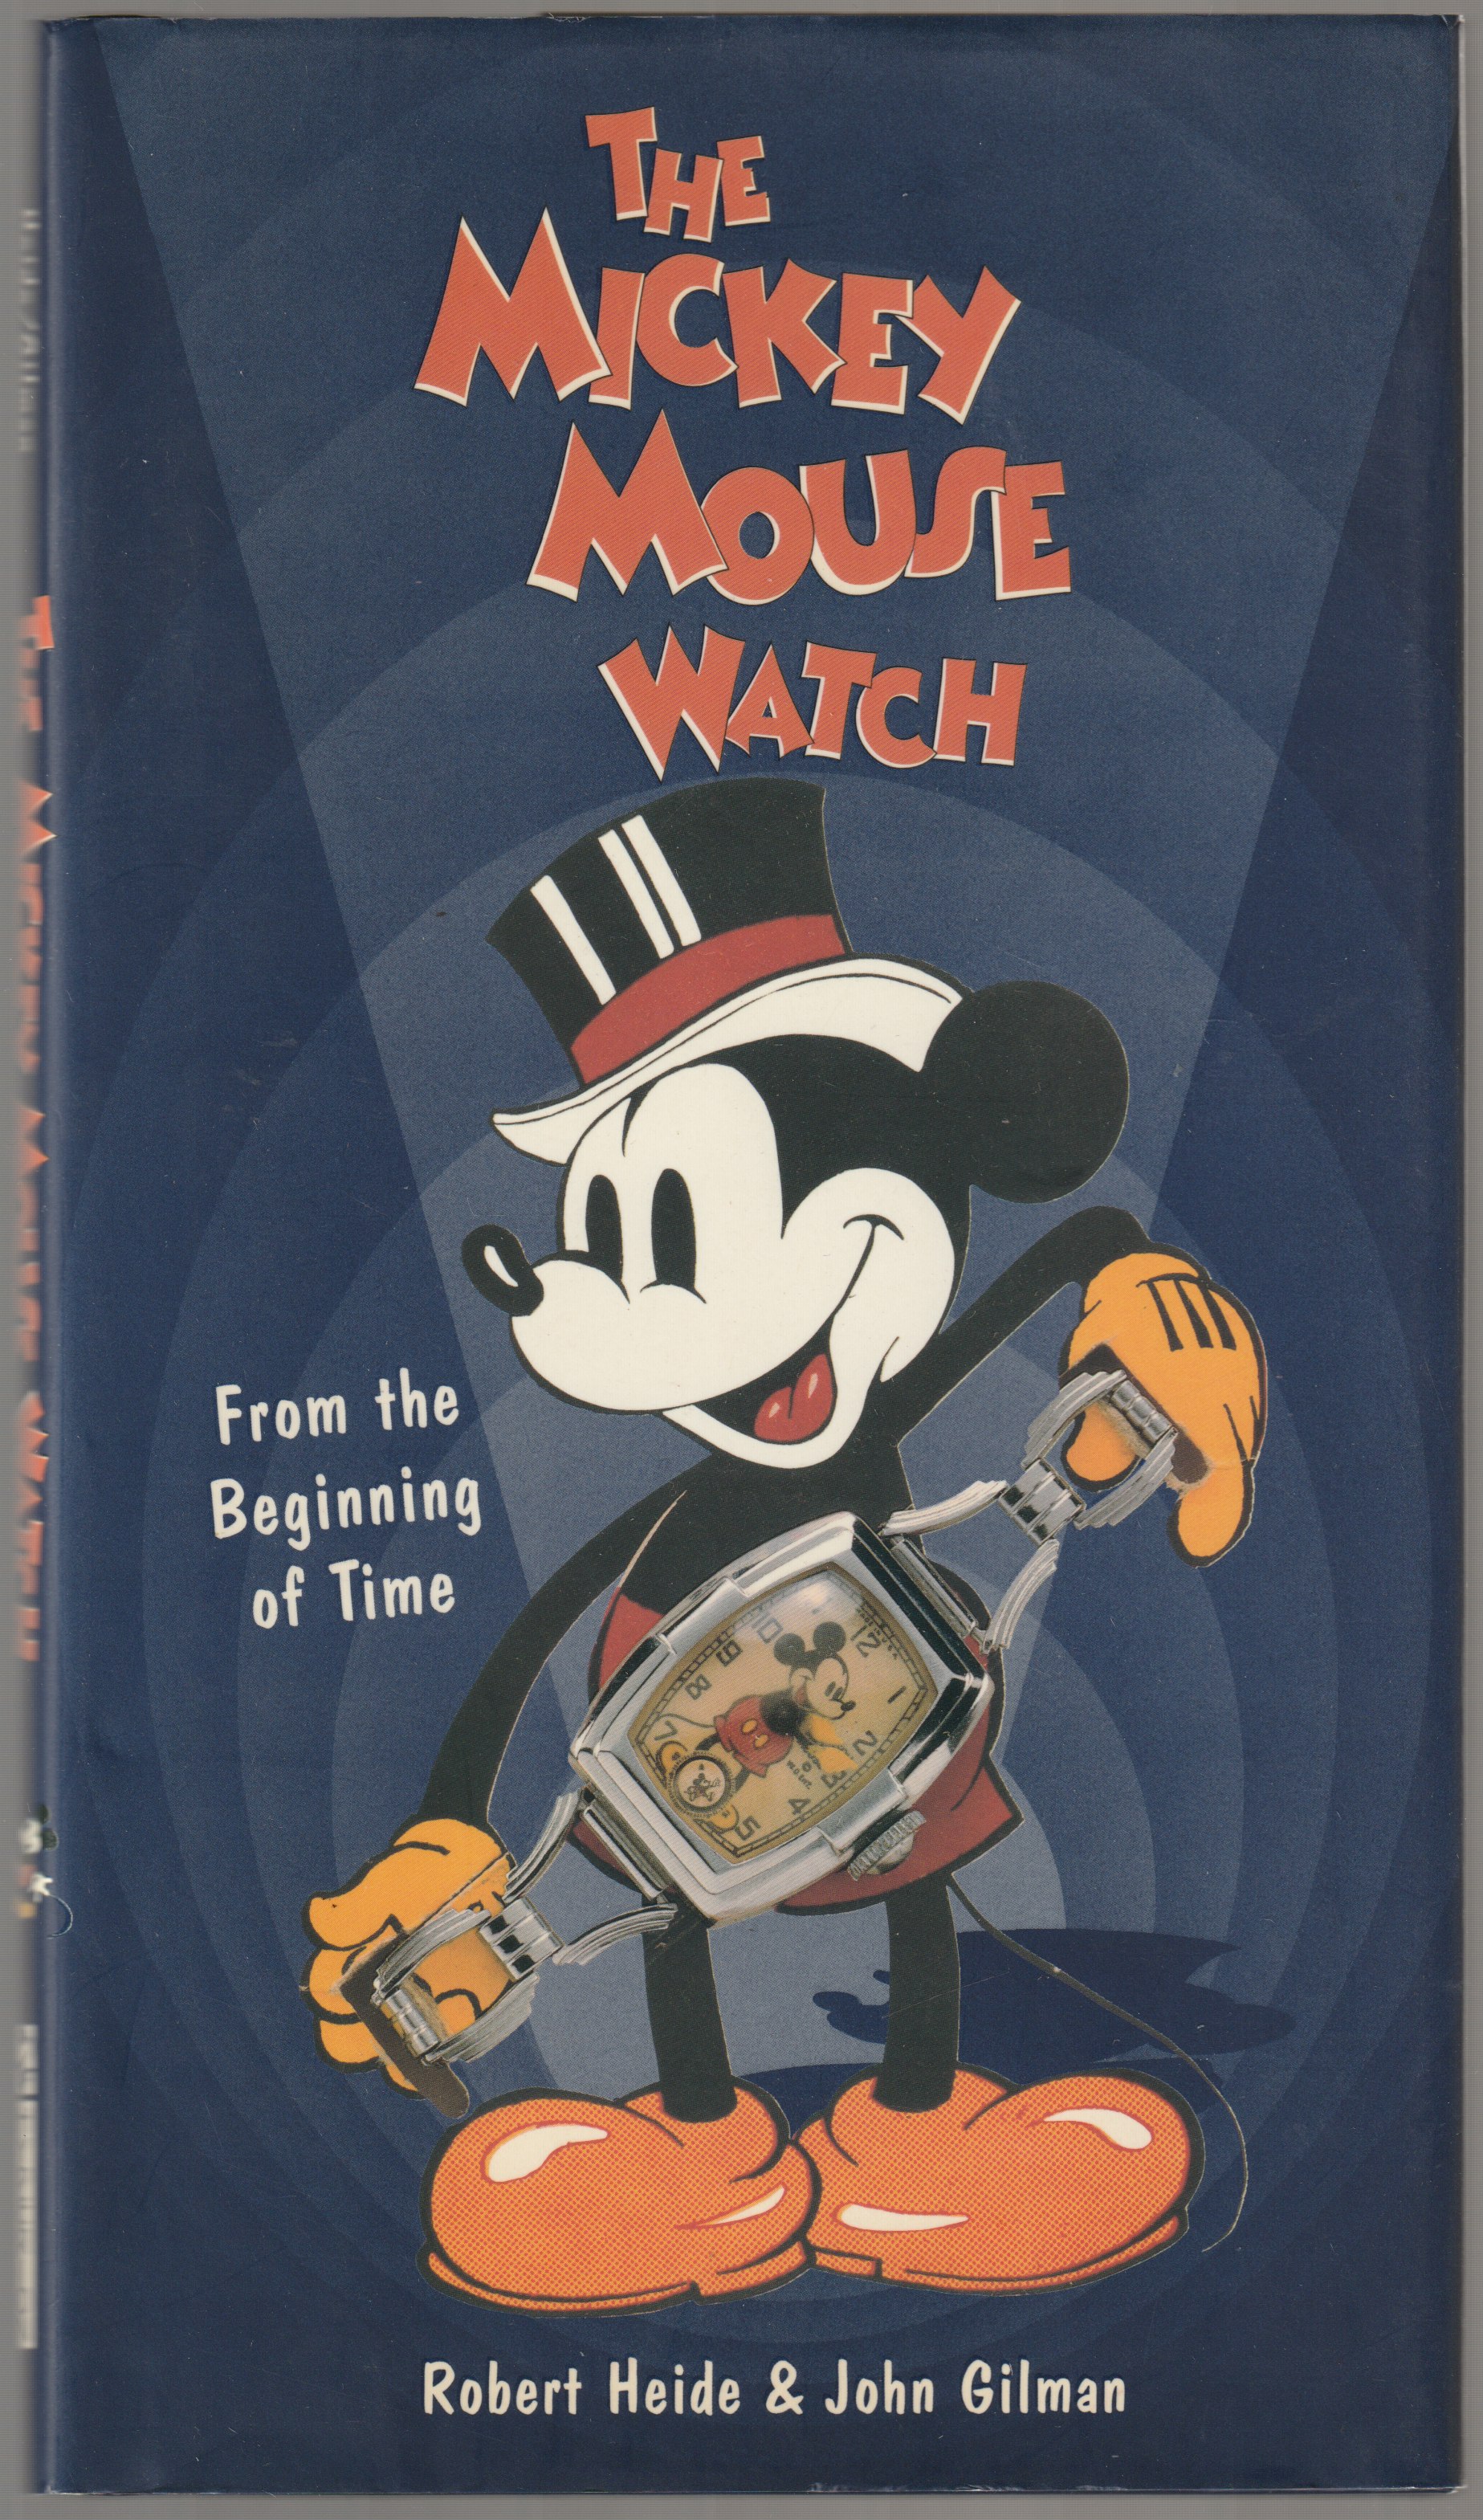 The Mickey Mouse watch : from the beginning of time.